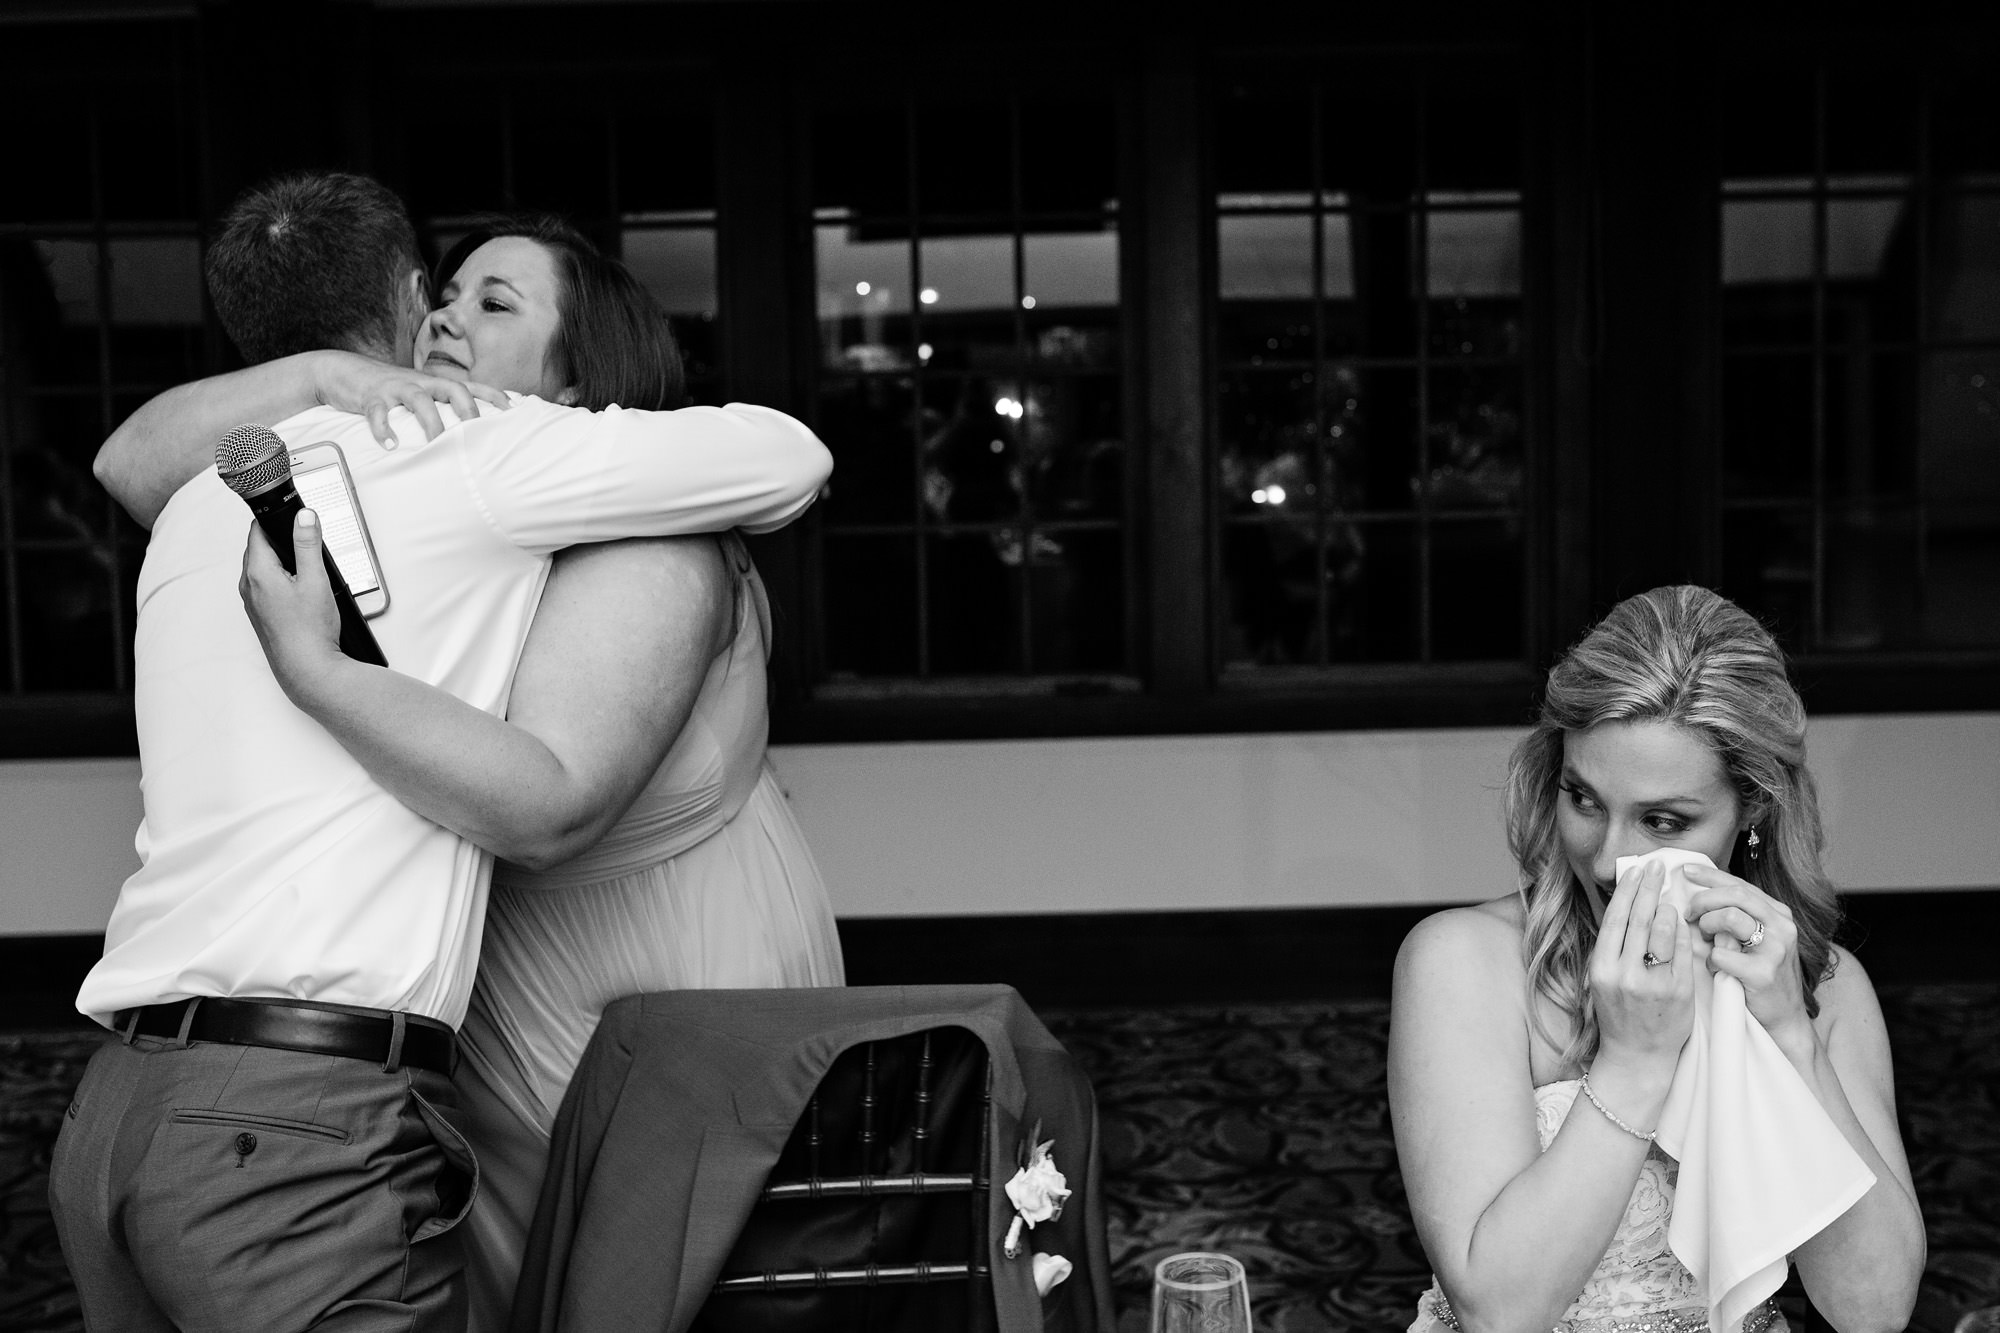 The bride had an emotional moment while her maid of honor hugged her husband